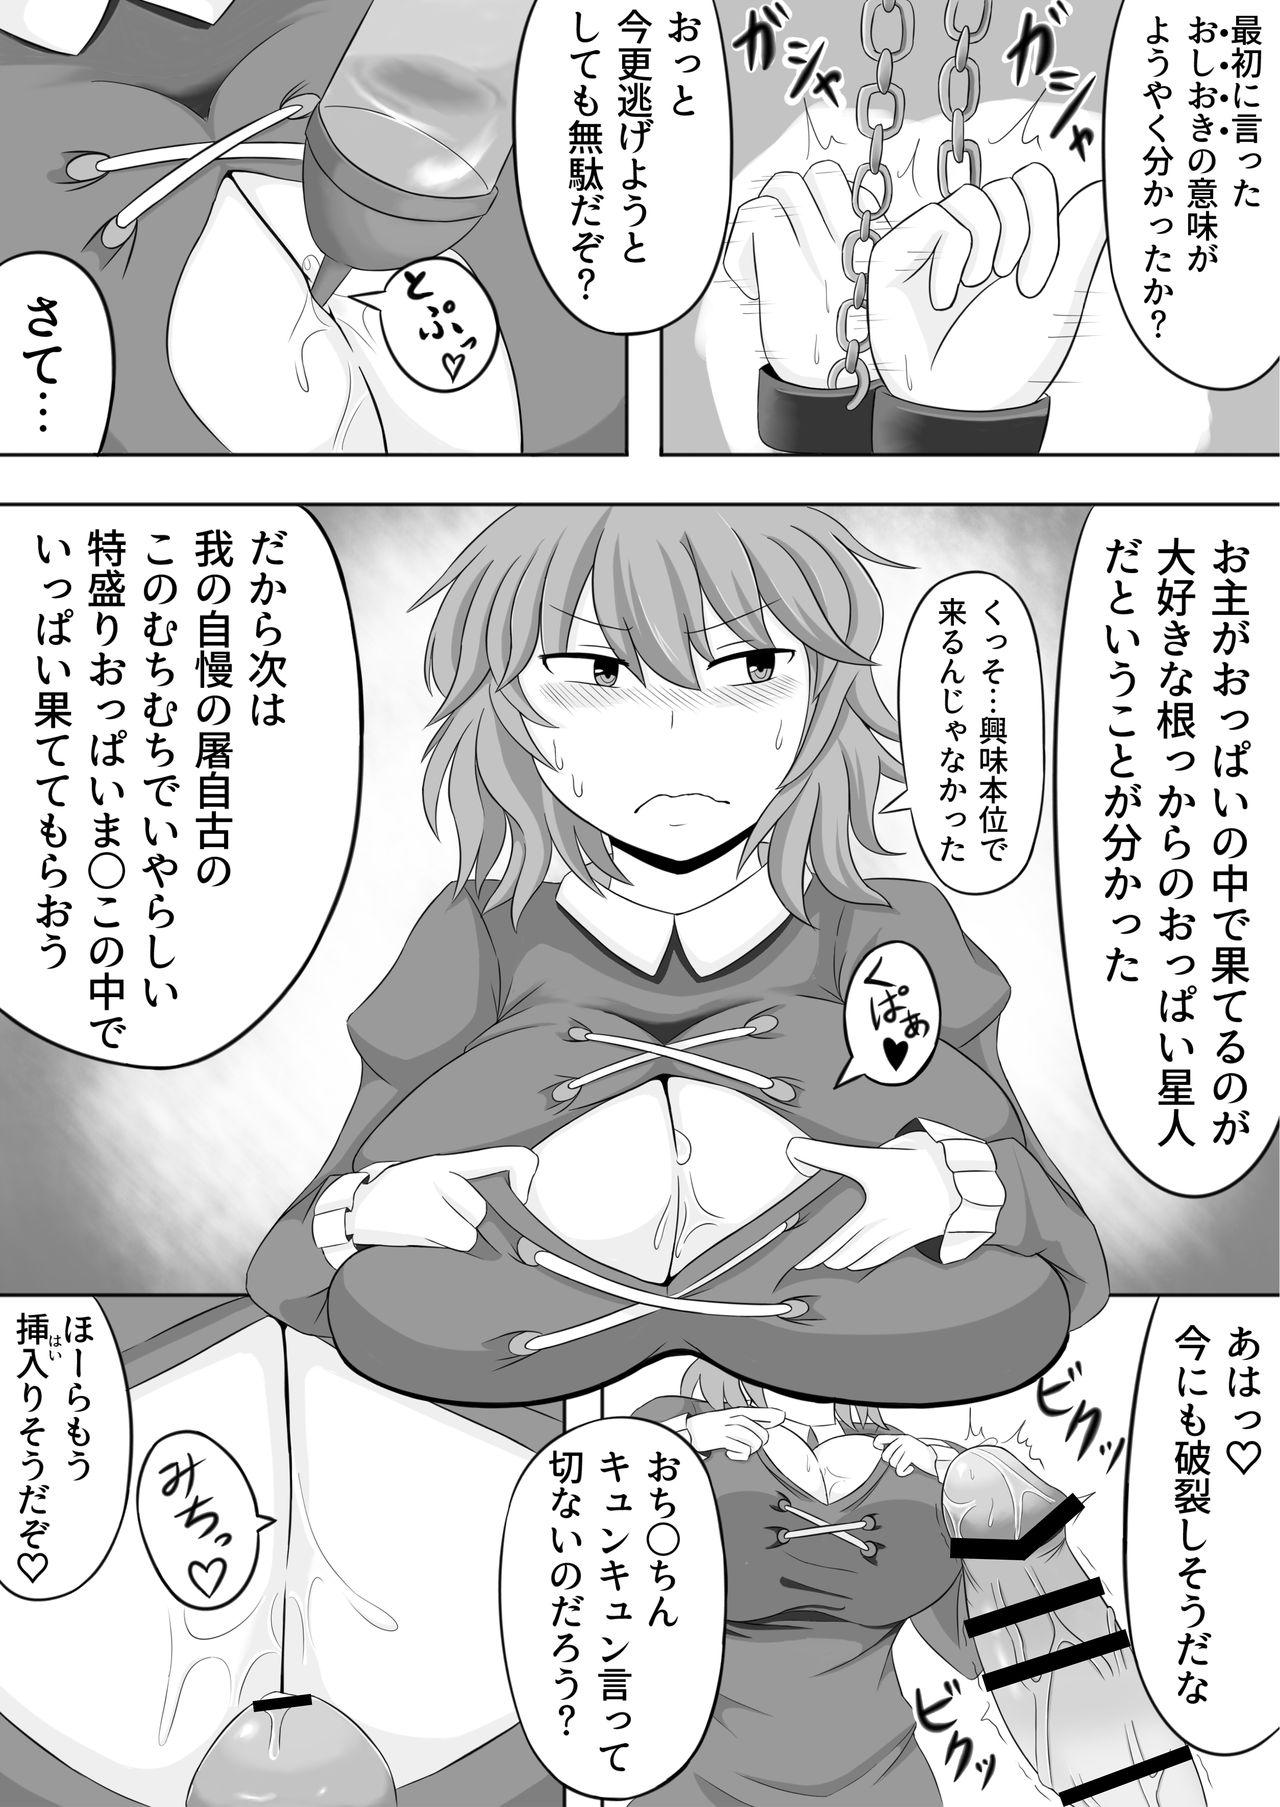 Blacksonboys ふととじ搾り - Touhou project Doggystyle Porn - Page 5